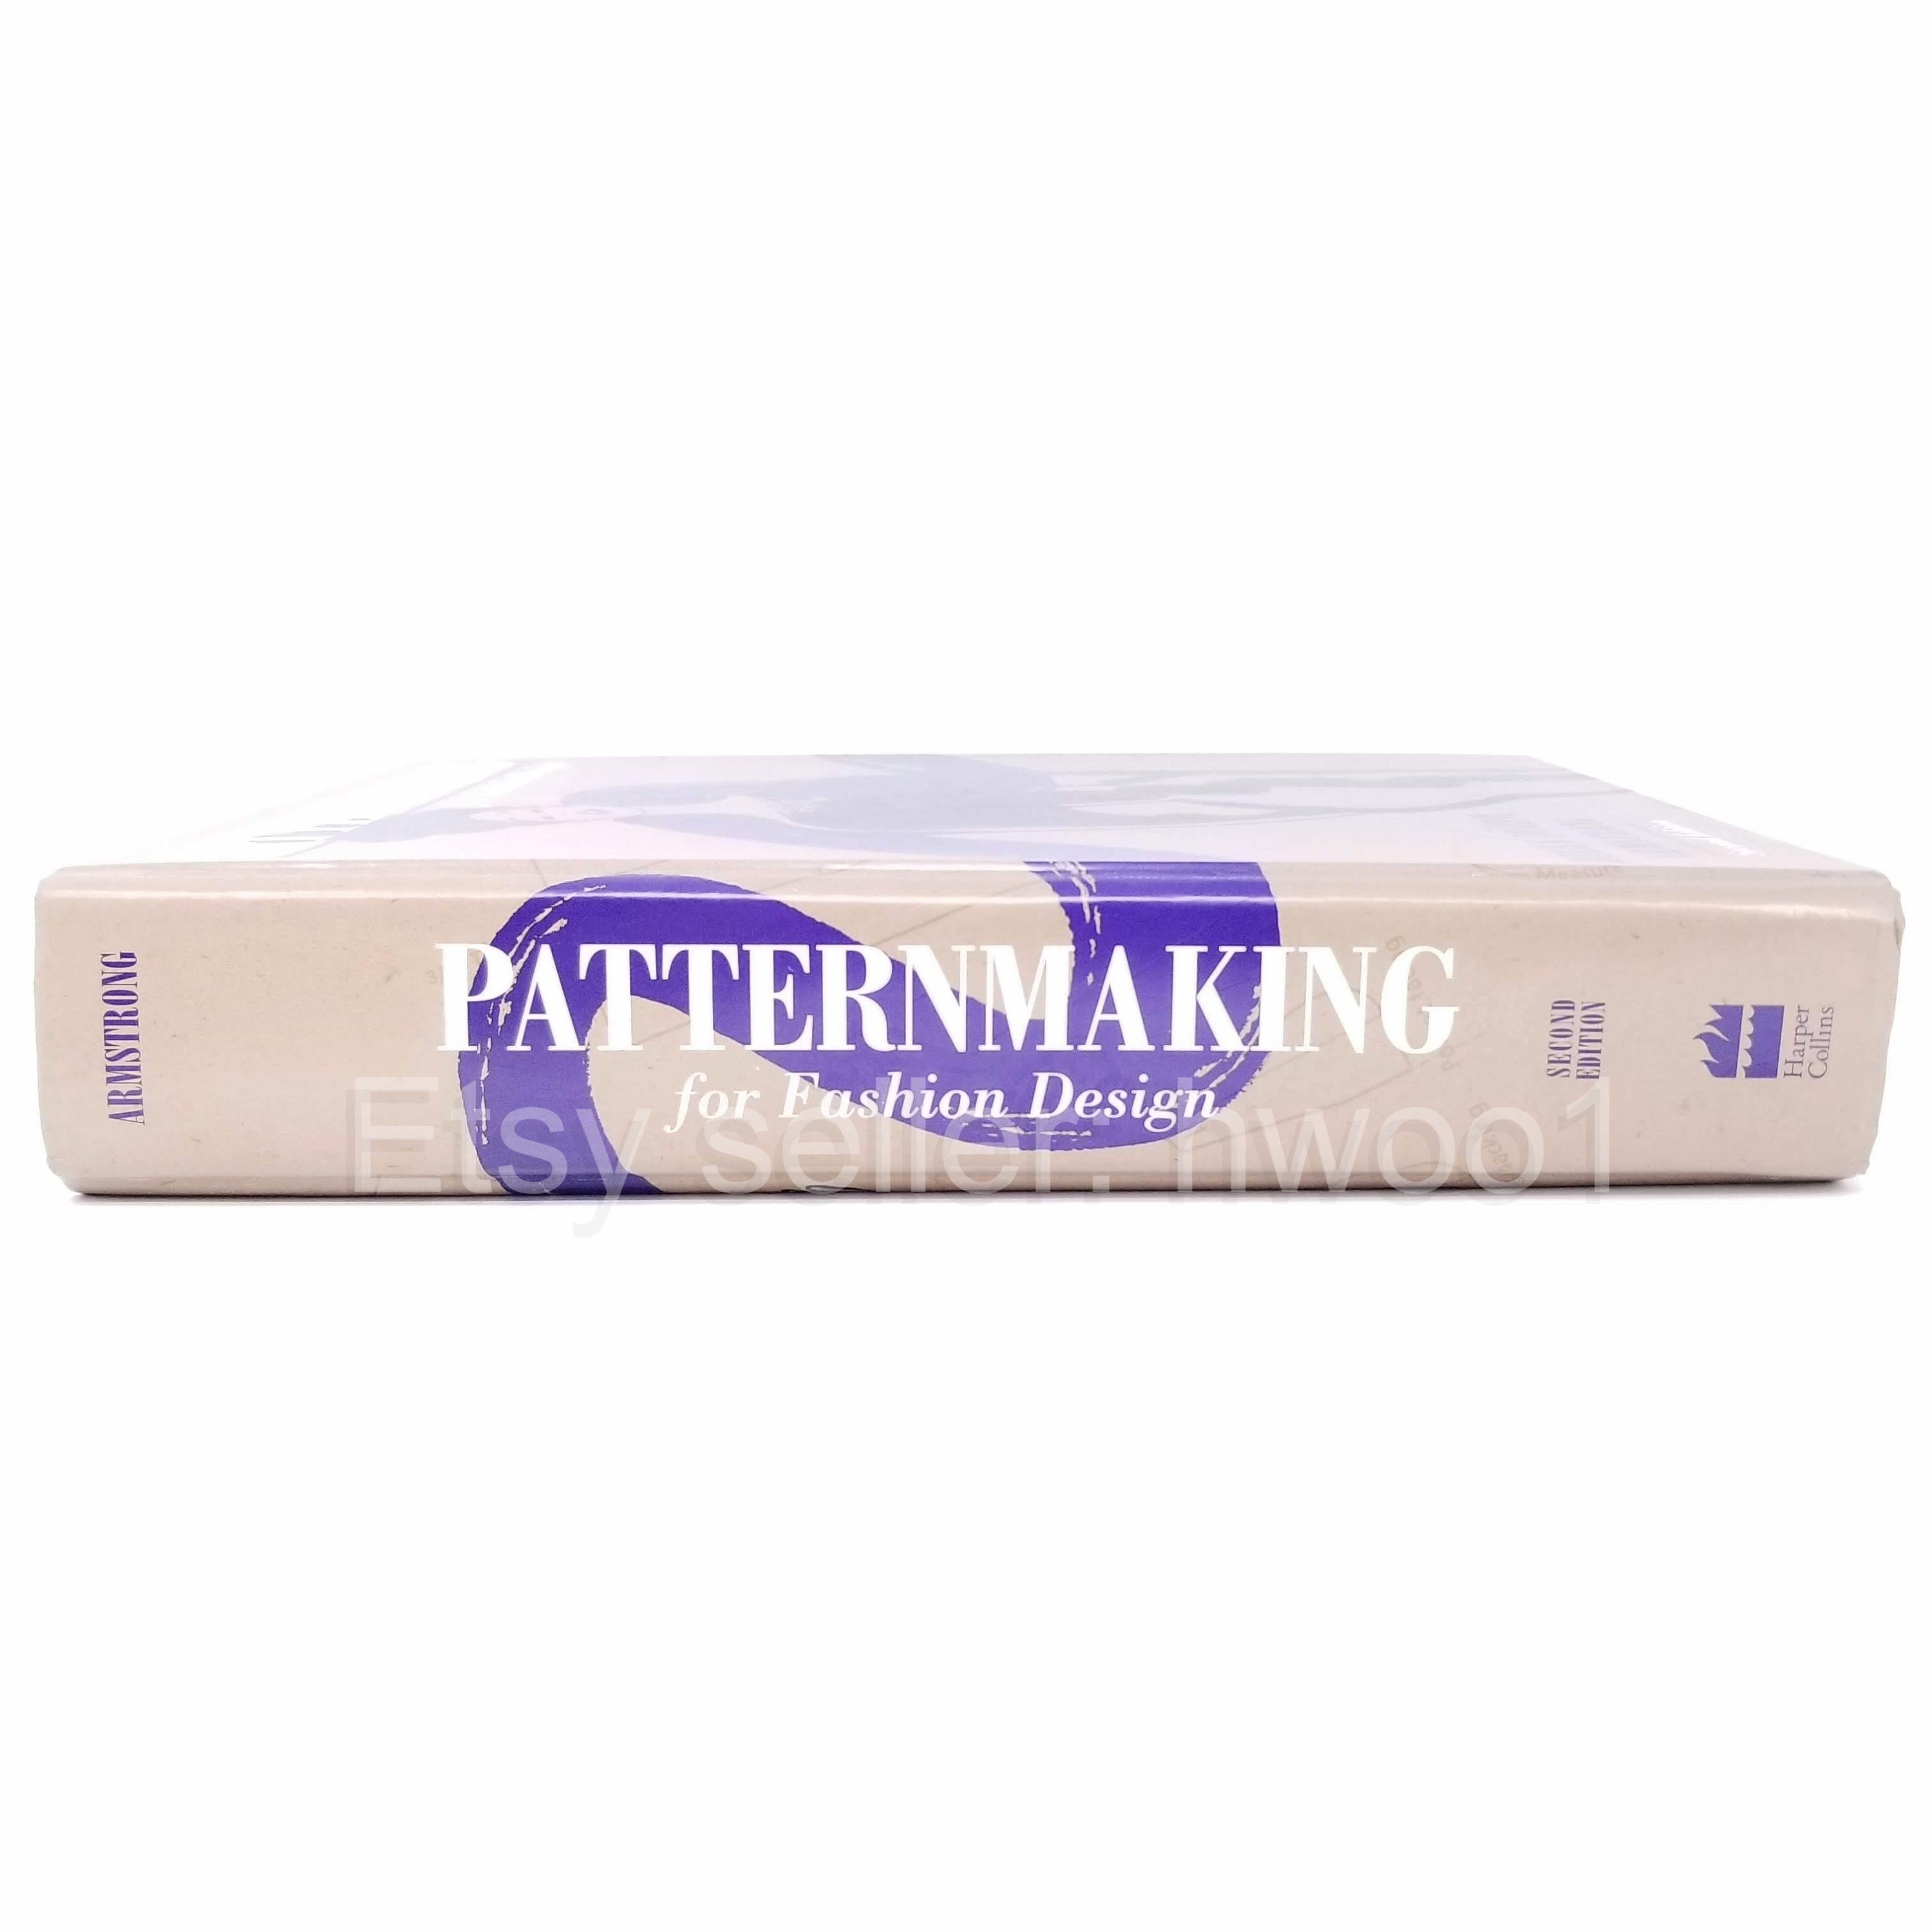 Patternmaking for Fashion Design Helen J. Armstrong (1995, Hardcover, 4th  Print)